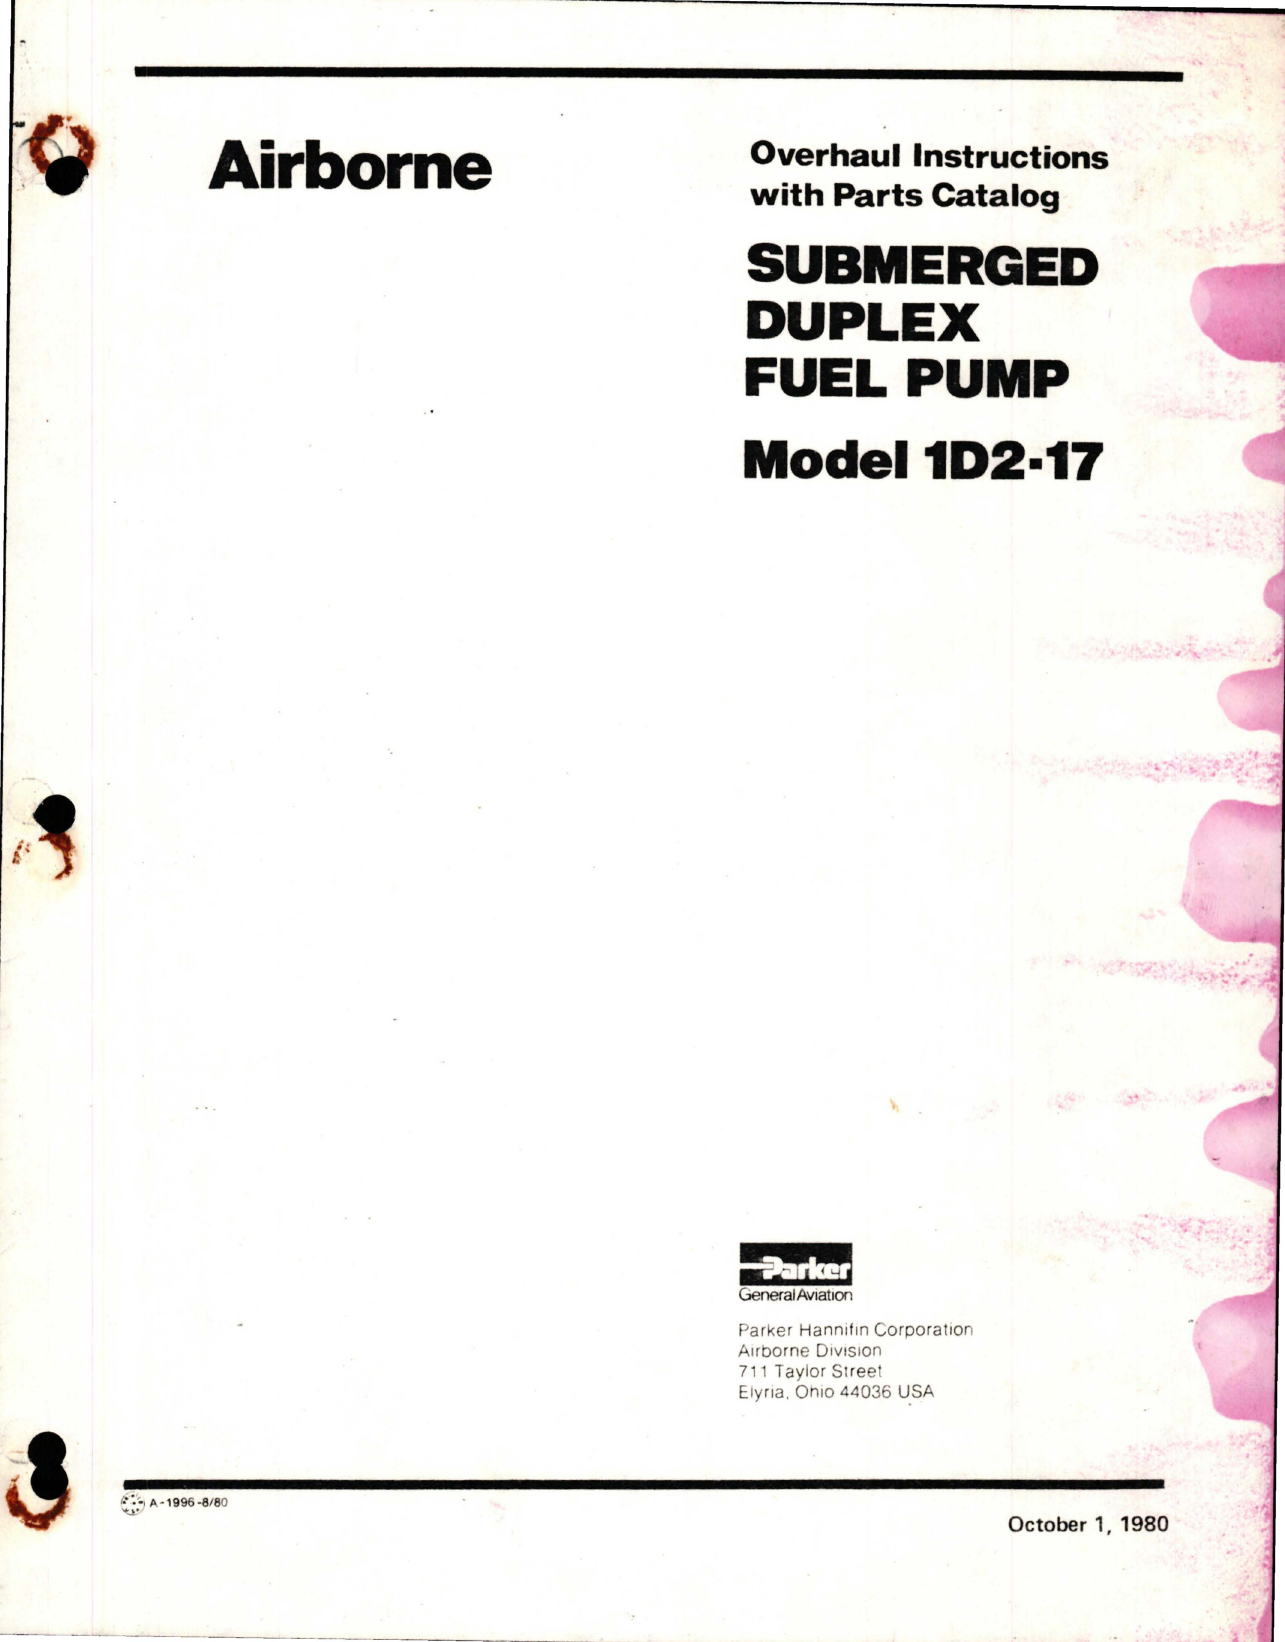 Sample page 1 from AirCorps Library document: Overhaul Instructions with Parts Catalog for Submerged Duplex Fuel Pump - Model 1D2-17 (Parker